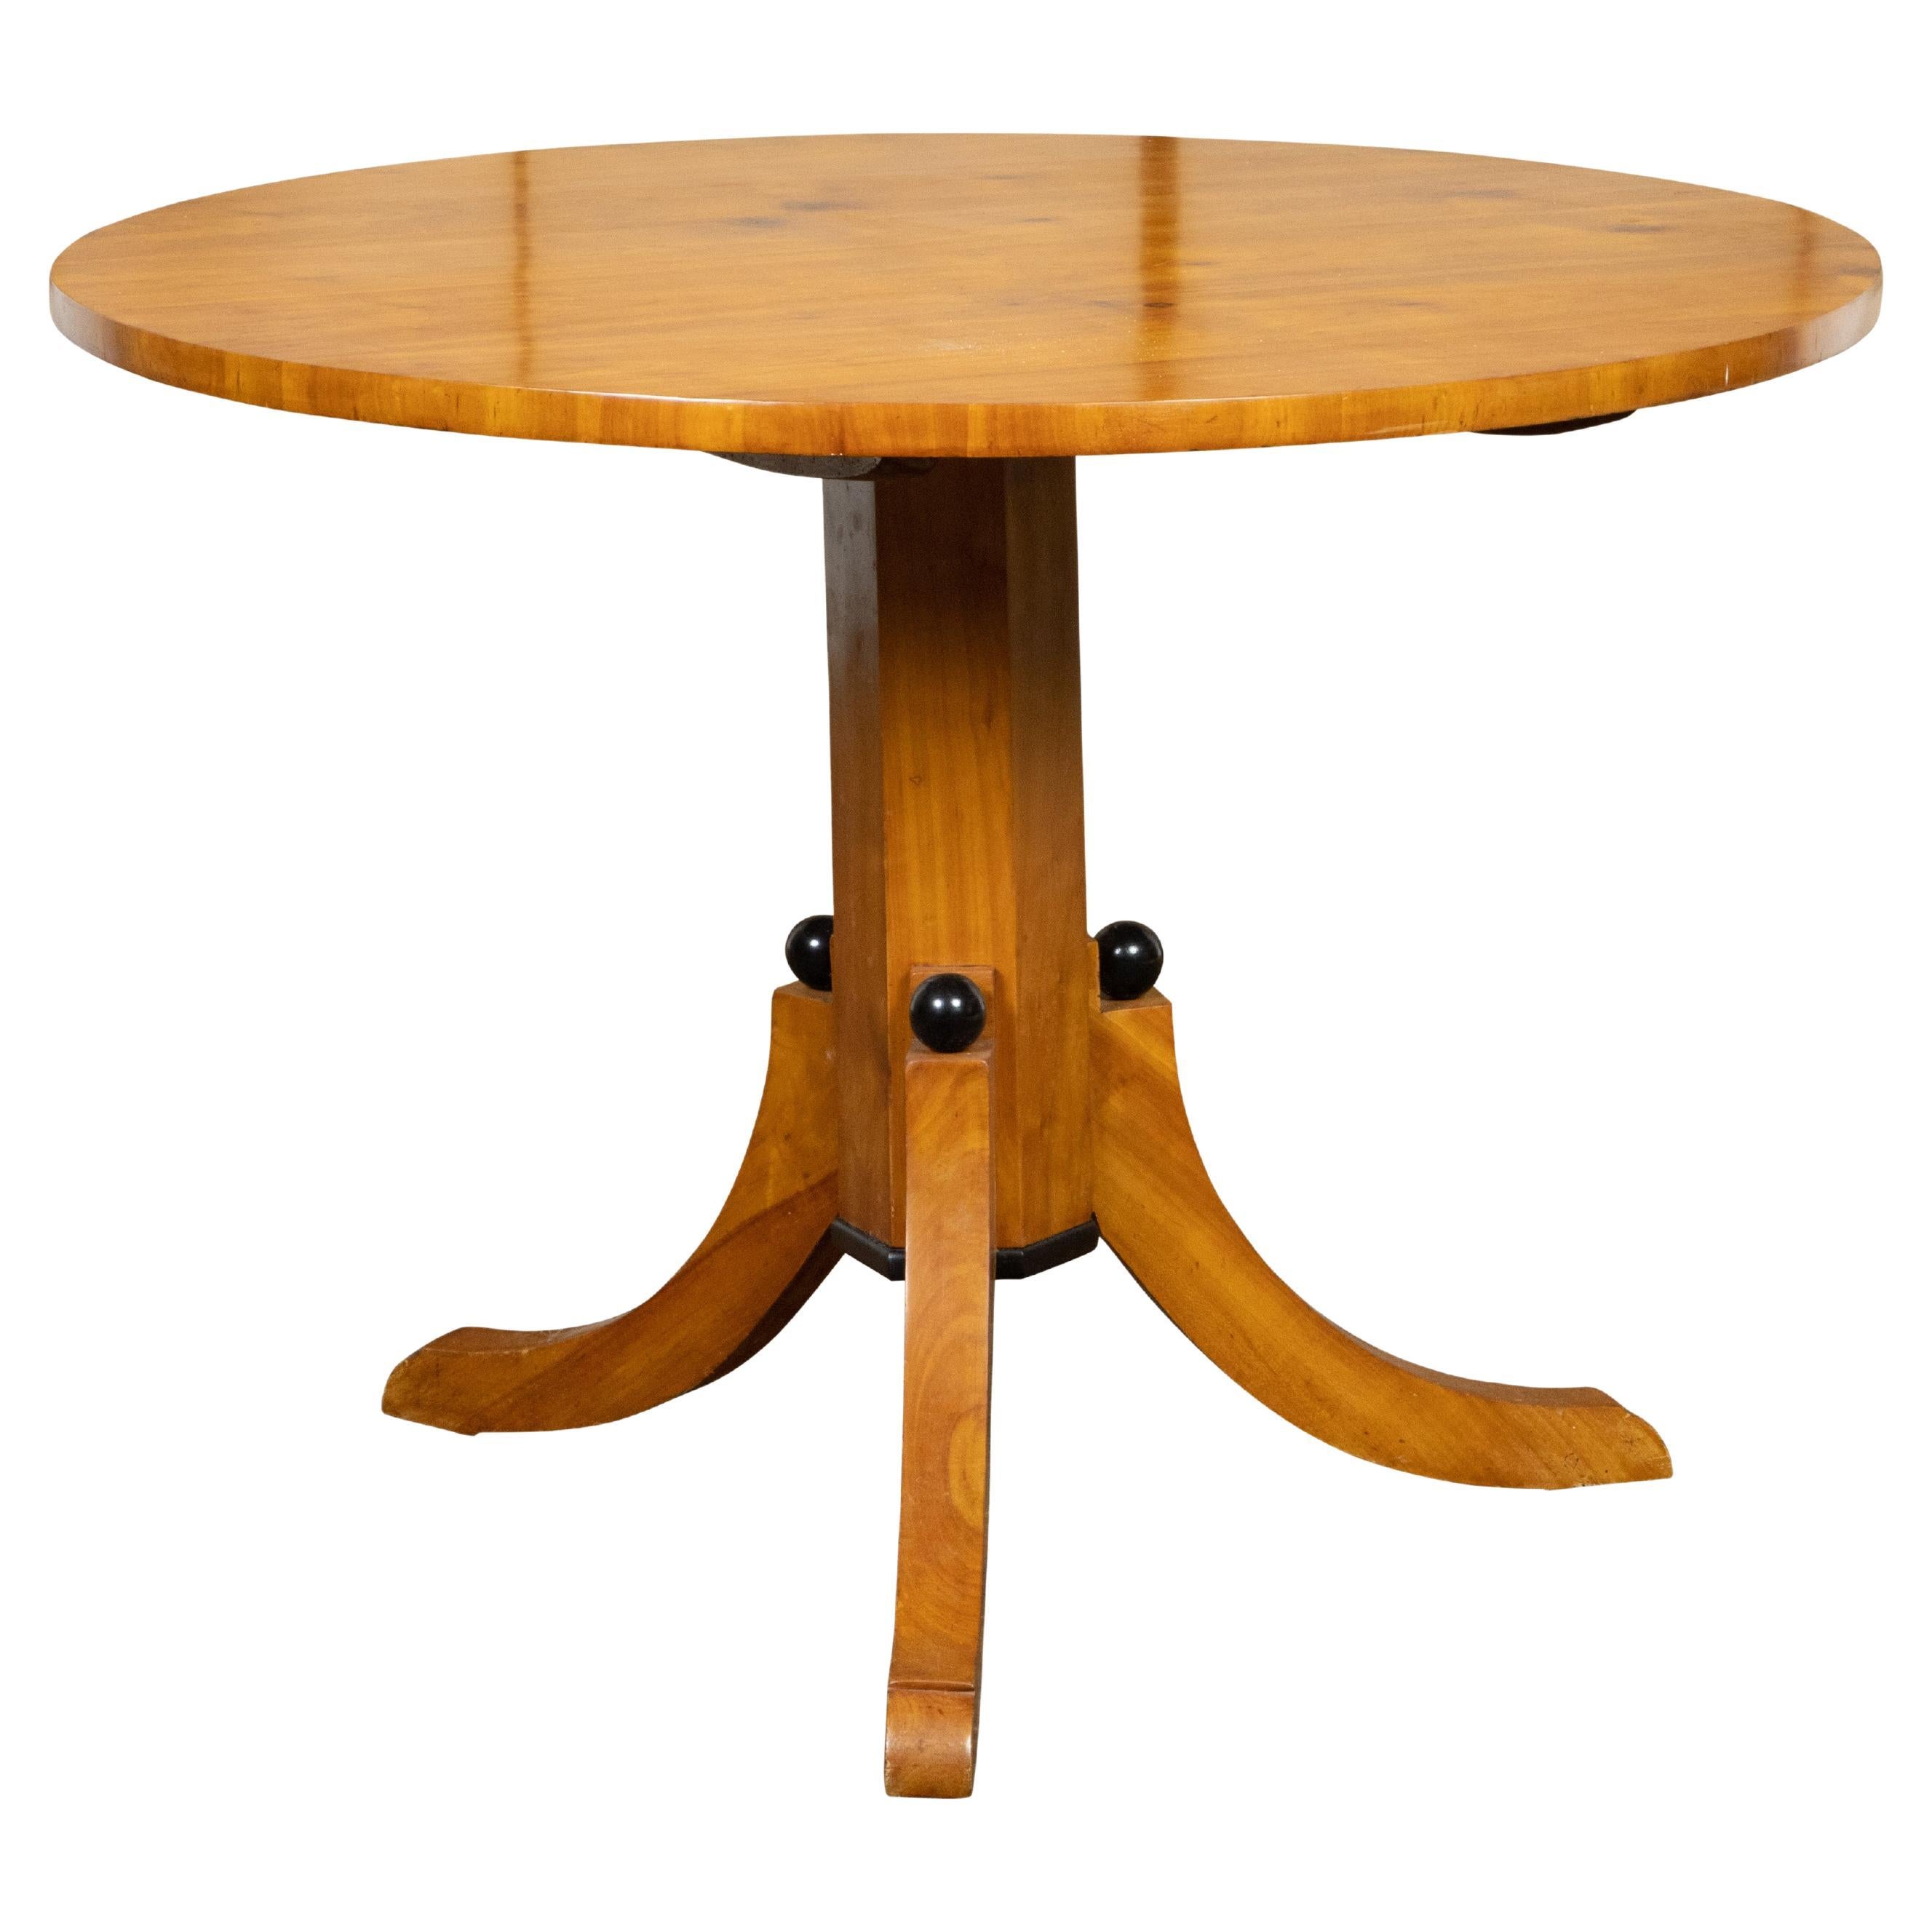 Biedermeier Period 19th Century Pine Center Table with Round Top and Tripod Base